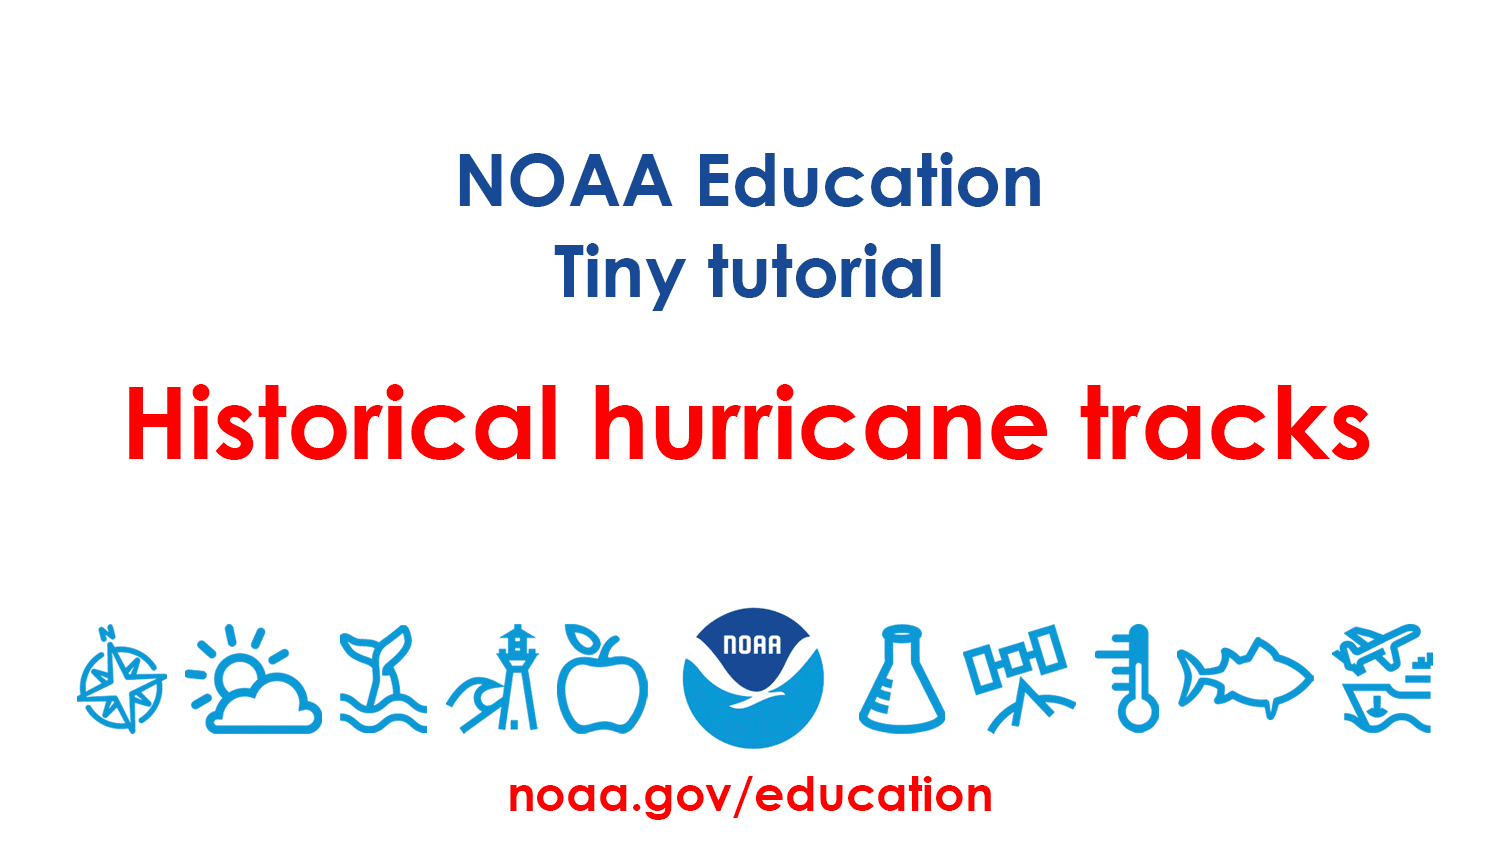 Animated tiny tutorial for accessing information on historical hurricane tracks. 